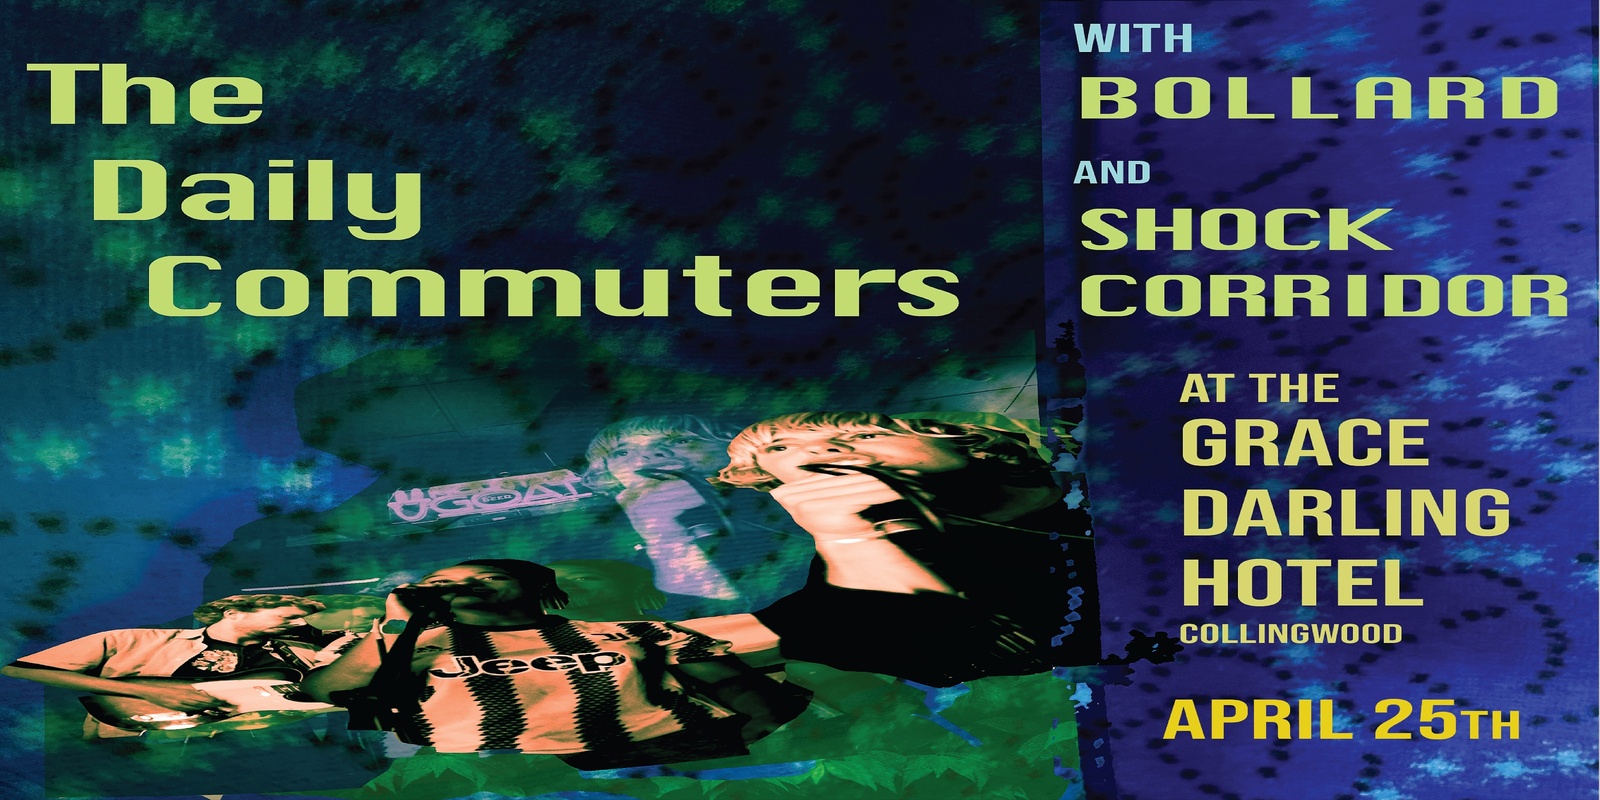 Banner image for The Daily Commuters w/ Bollard & Shock Corridor at The Grace Darling